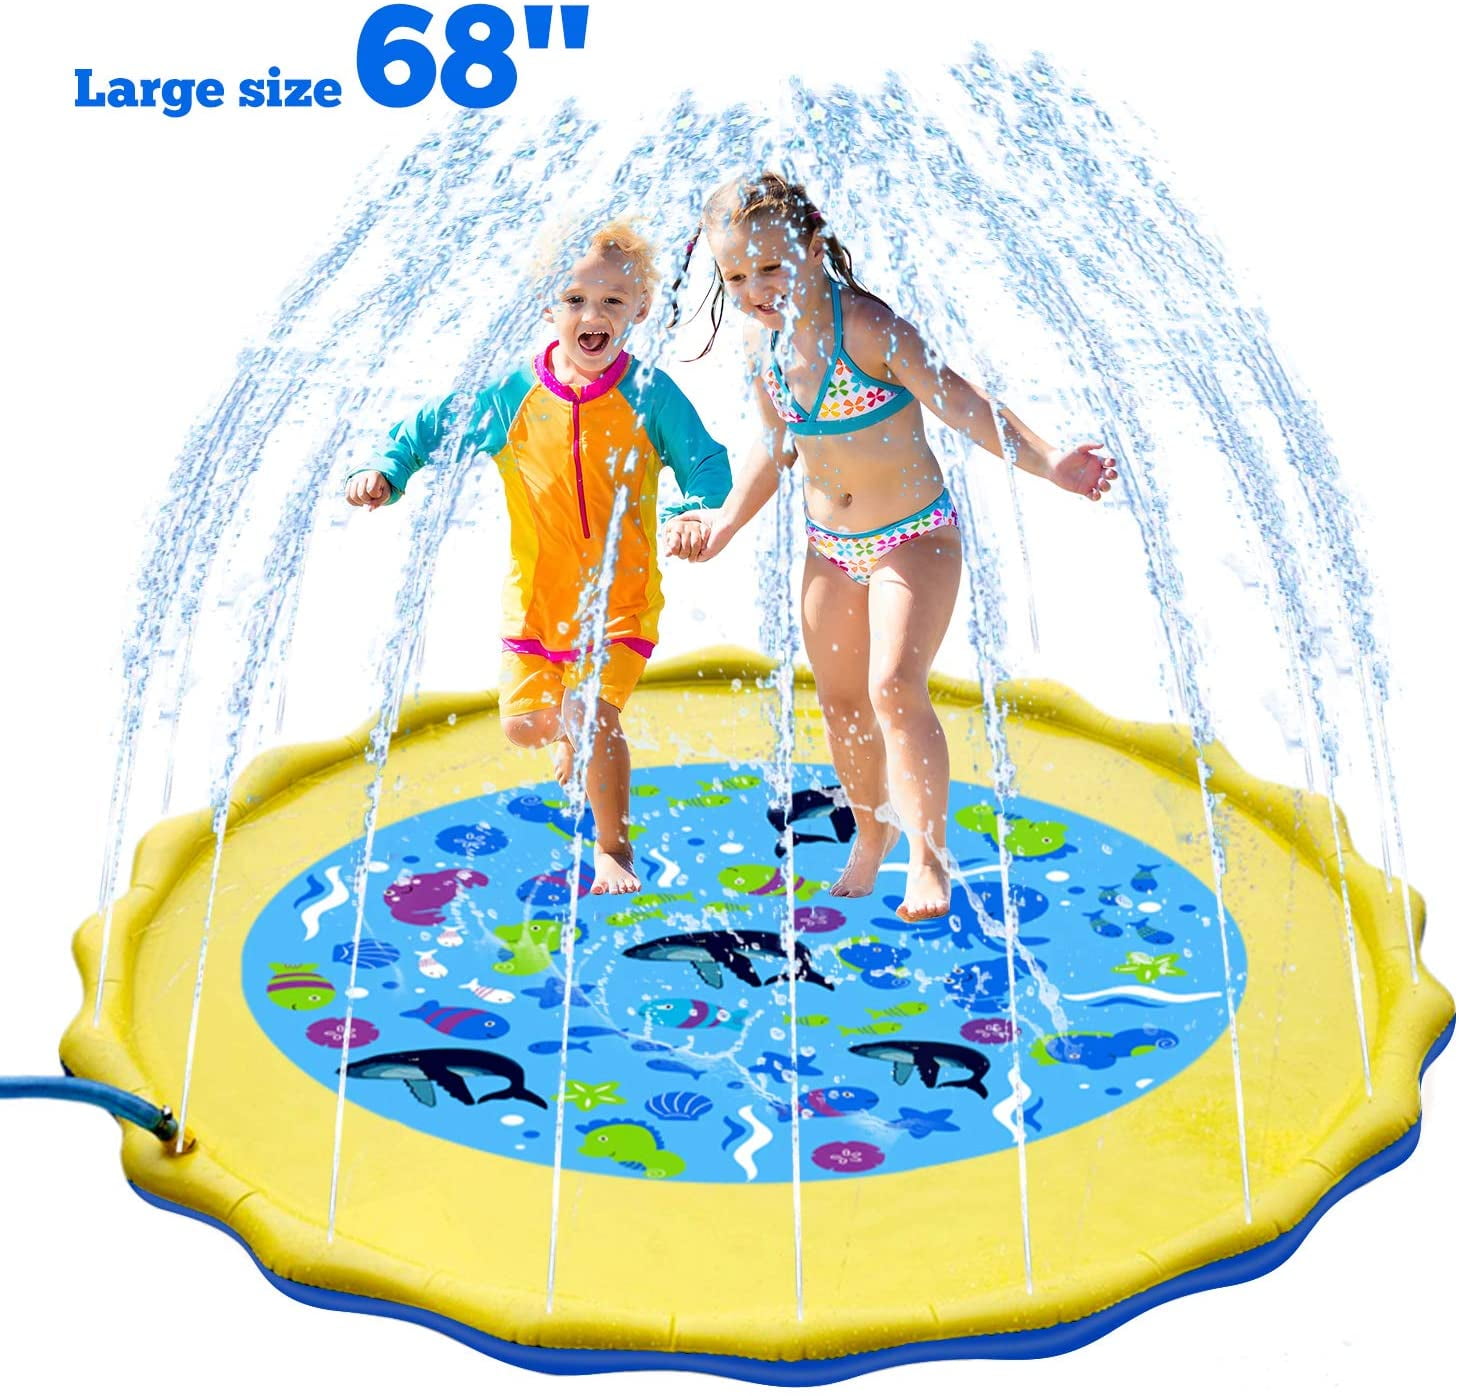 67in Outdoor Inflatable Sprinkler Mat Lawn Animal Water Play Pad Children Gifts 